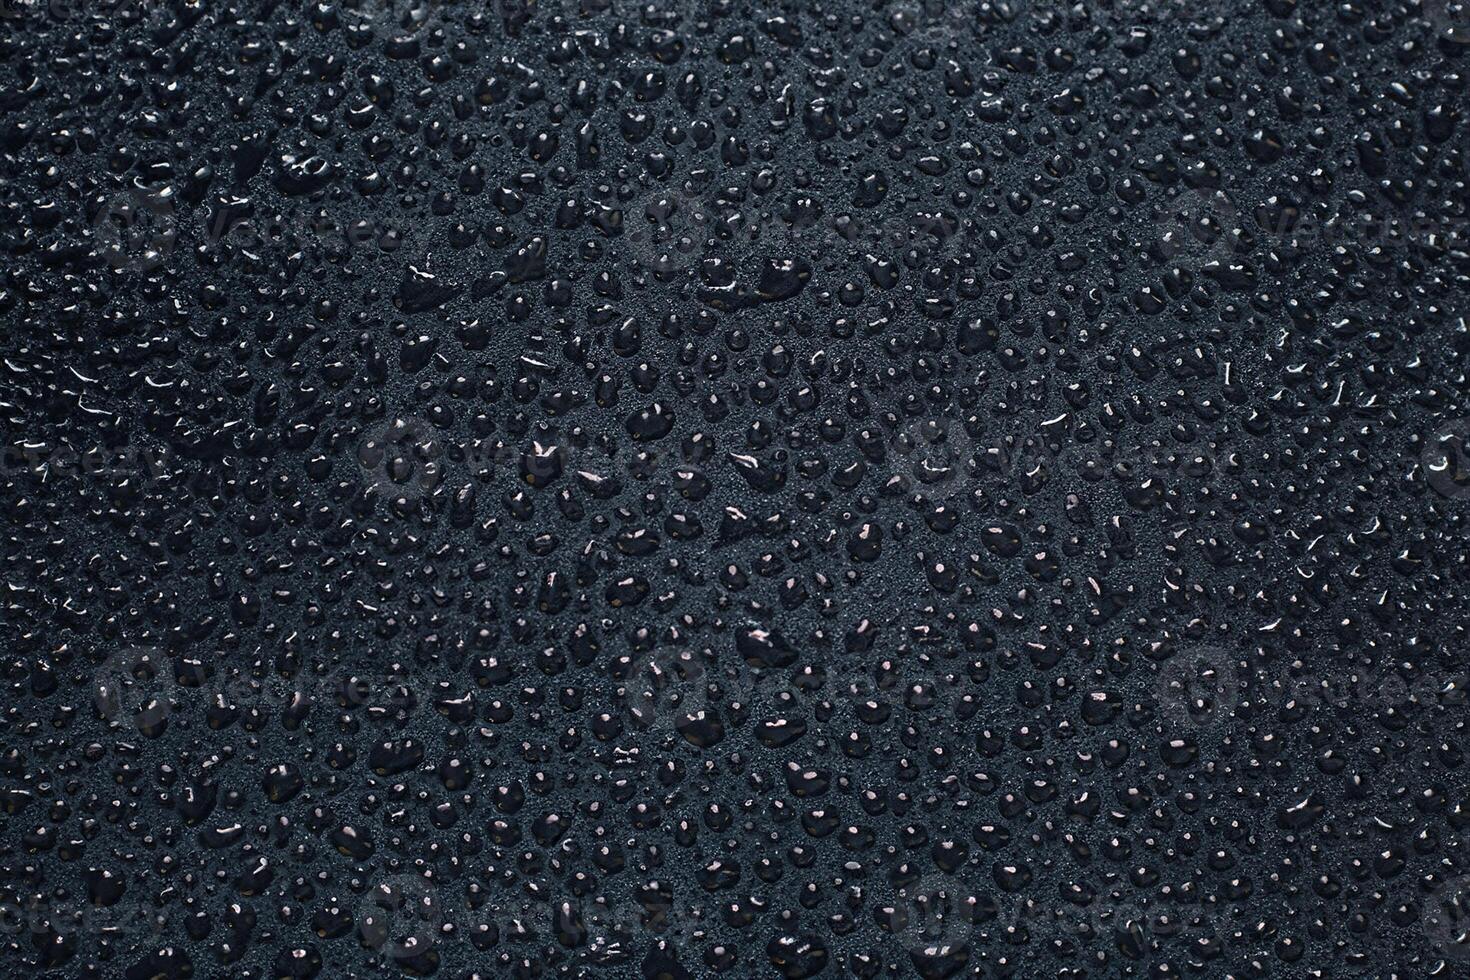 Glistening Water Droplets Against Moody Background. photo